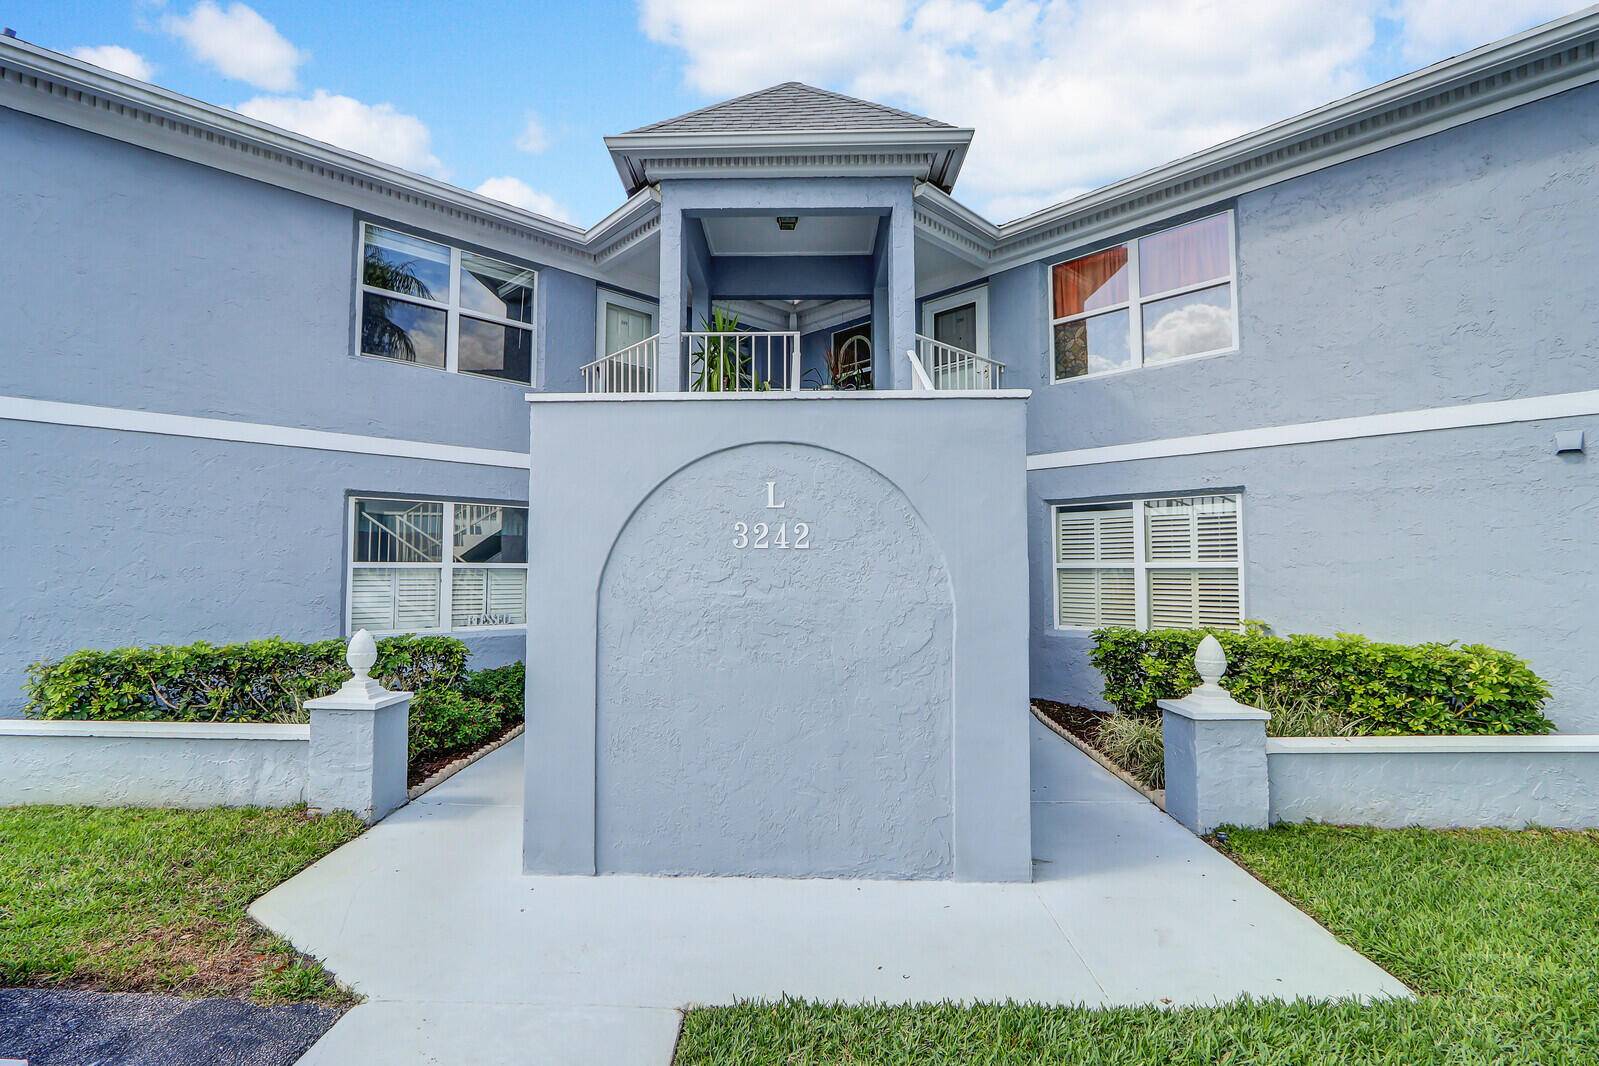 This centrally located and furnished 2 bedroom with 2 full bath condo is conveniently located near shops, restaurants, highway to airport 30 minute drive to Palm Beach International Airport, the ...